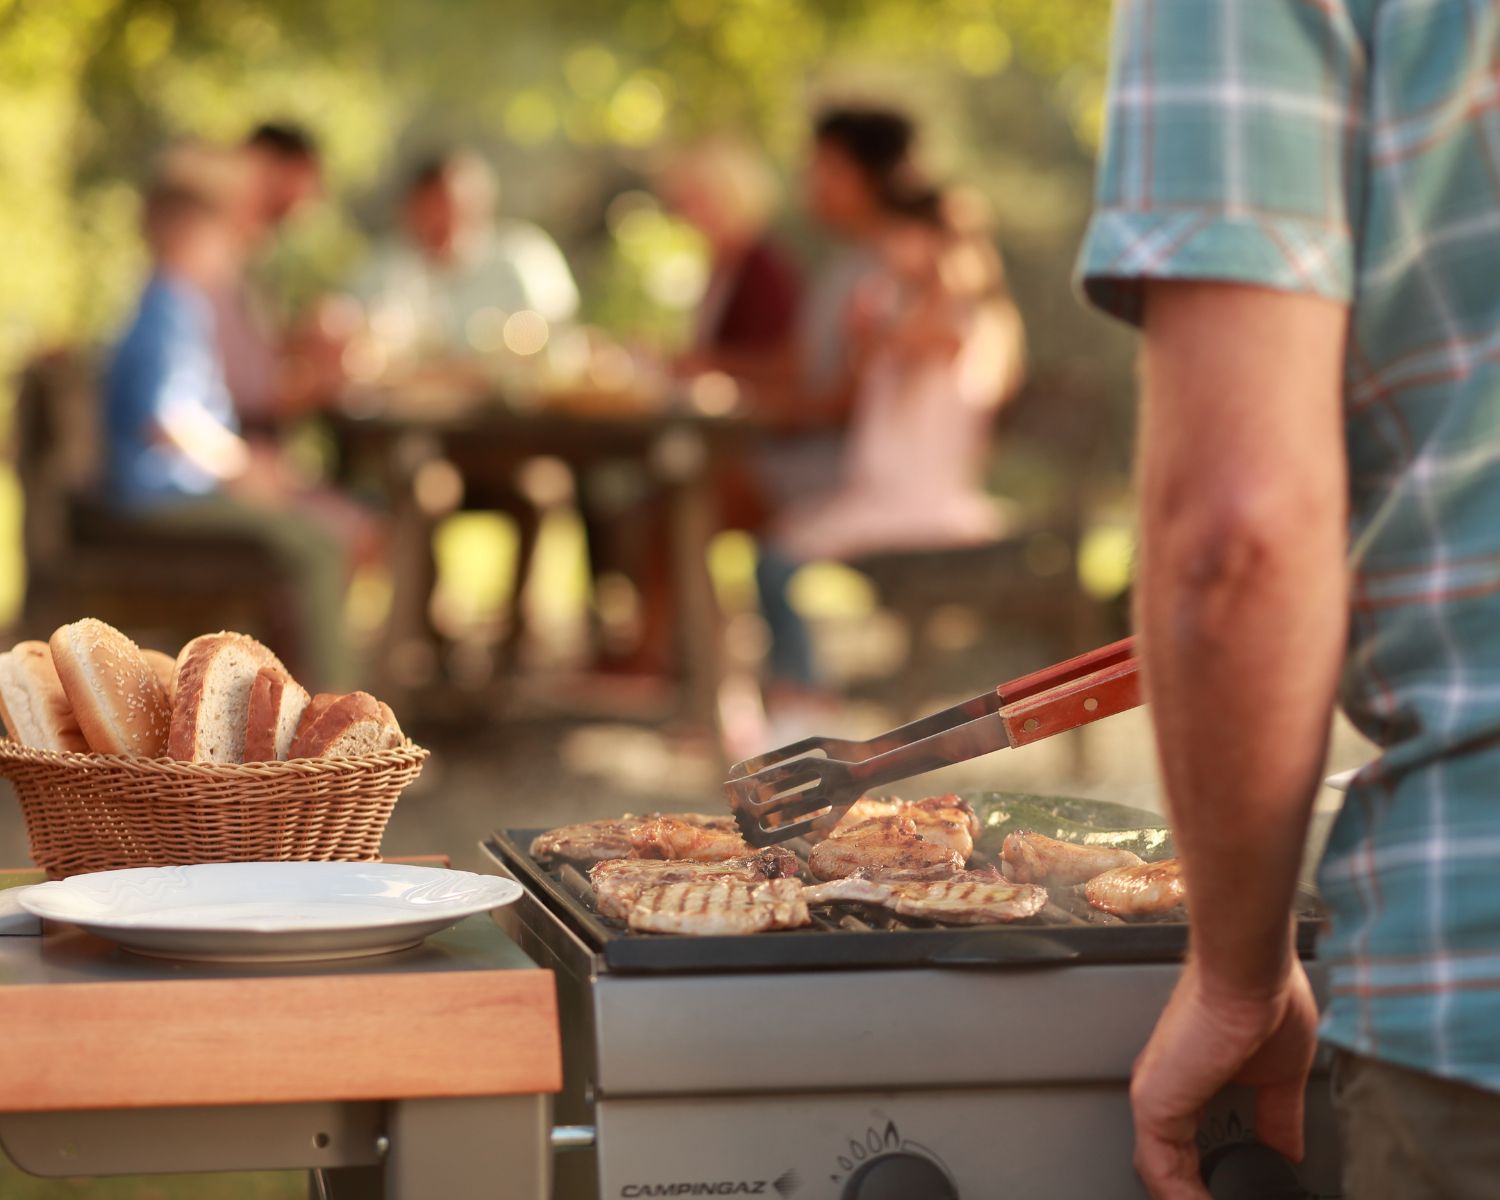 License to Grill:  Summer Safety Tips for Outdoor Cooking